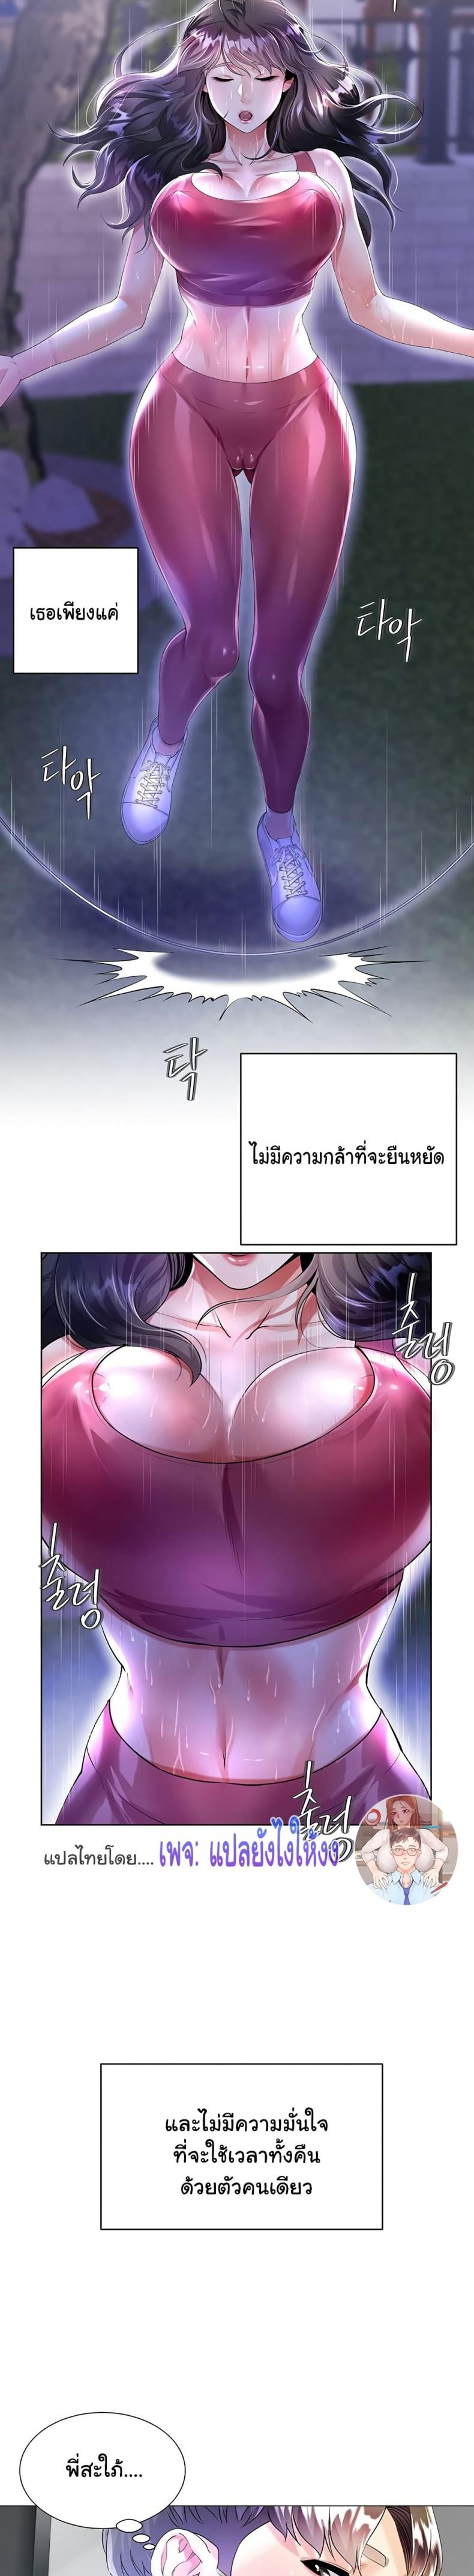 My Sister-in-law’s Skirt 1 ภาพที่ 4